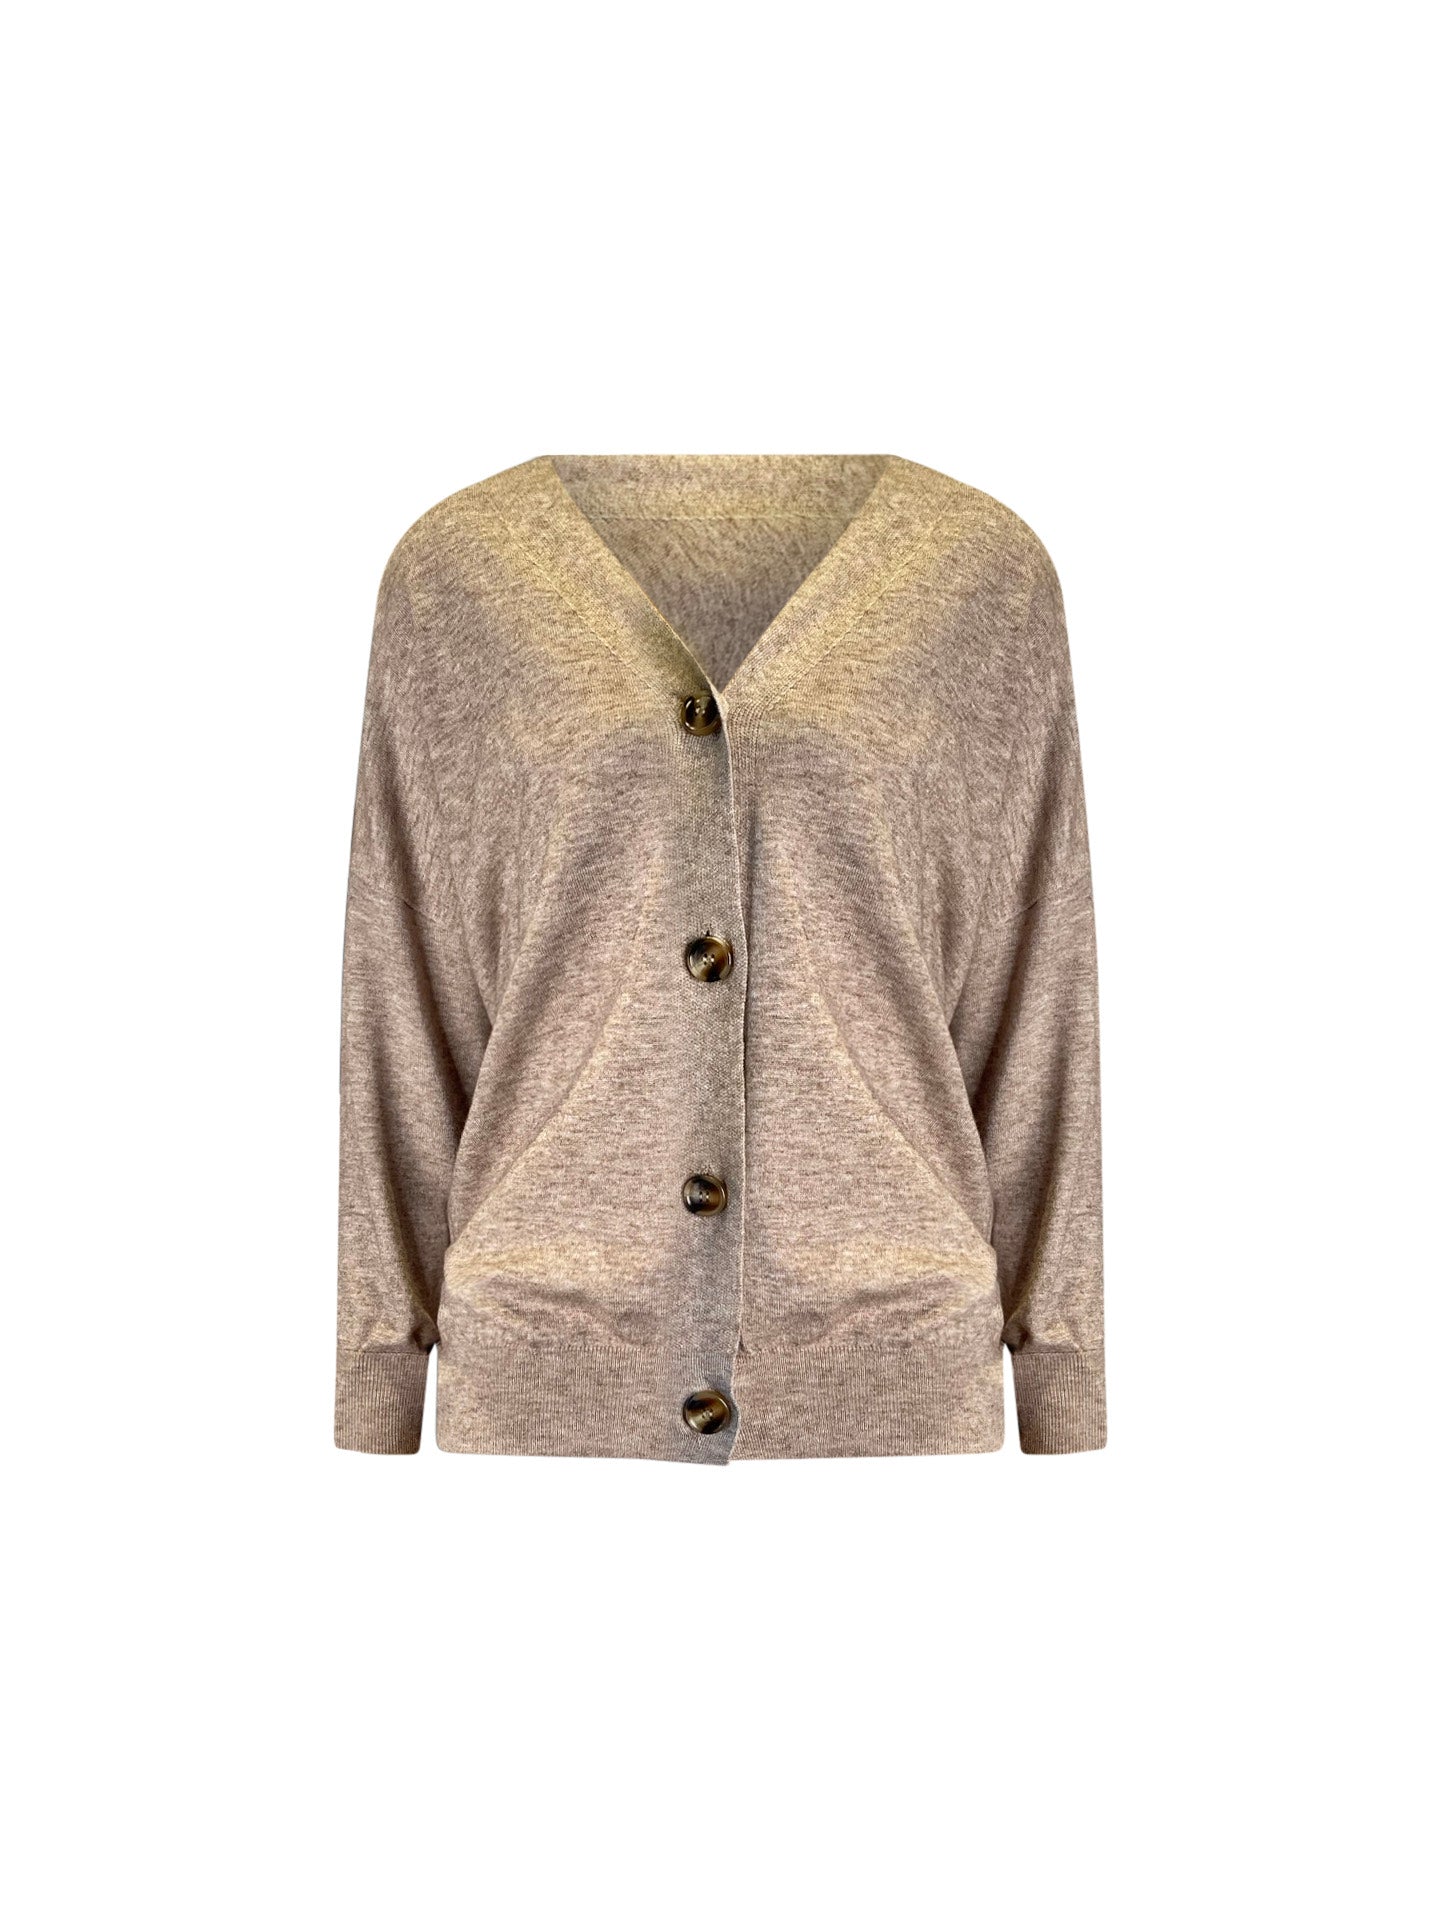 Cardigan by CES'T MOI